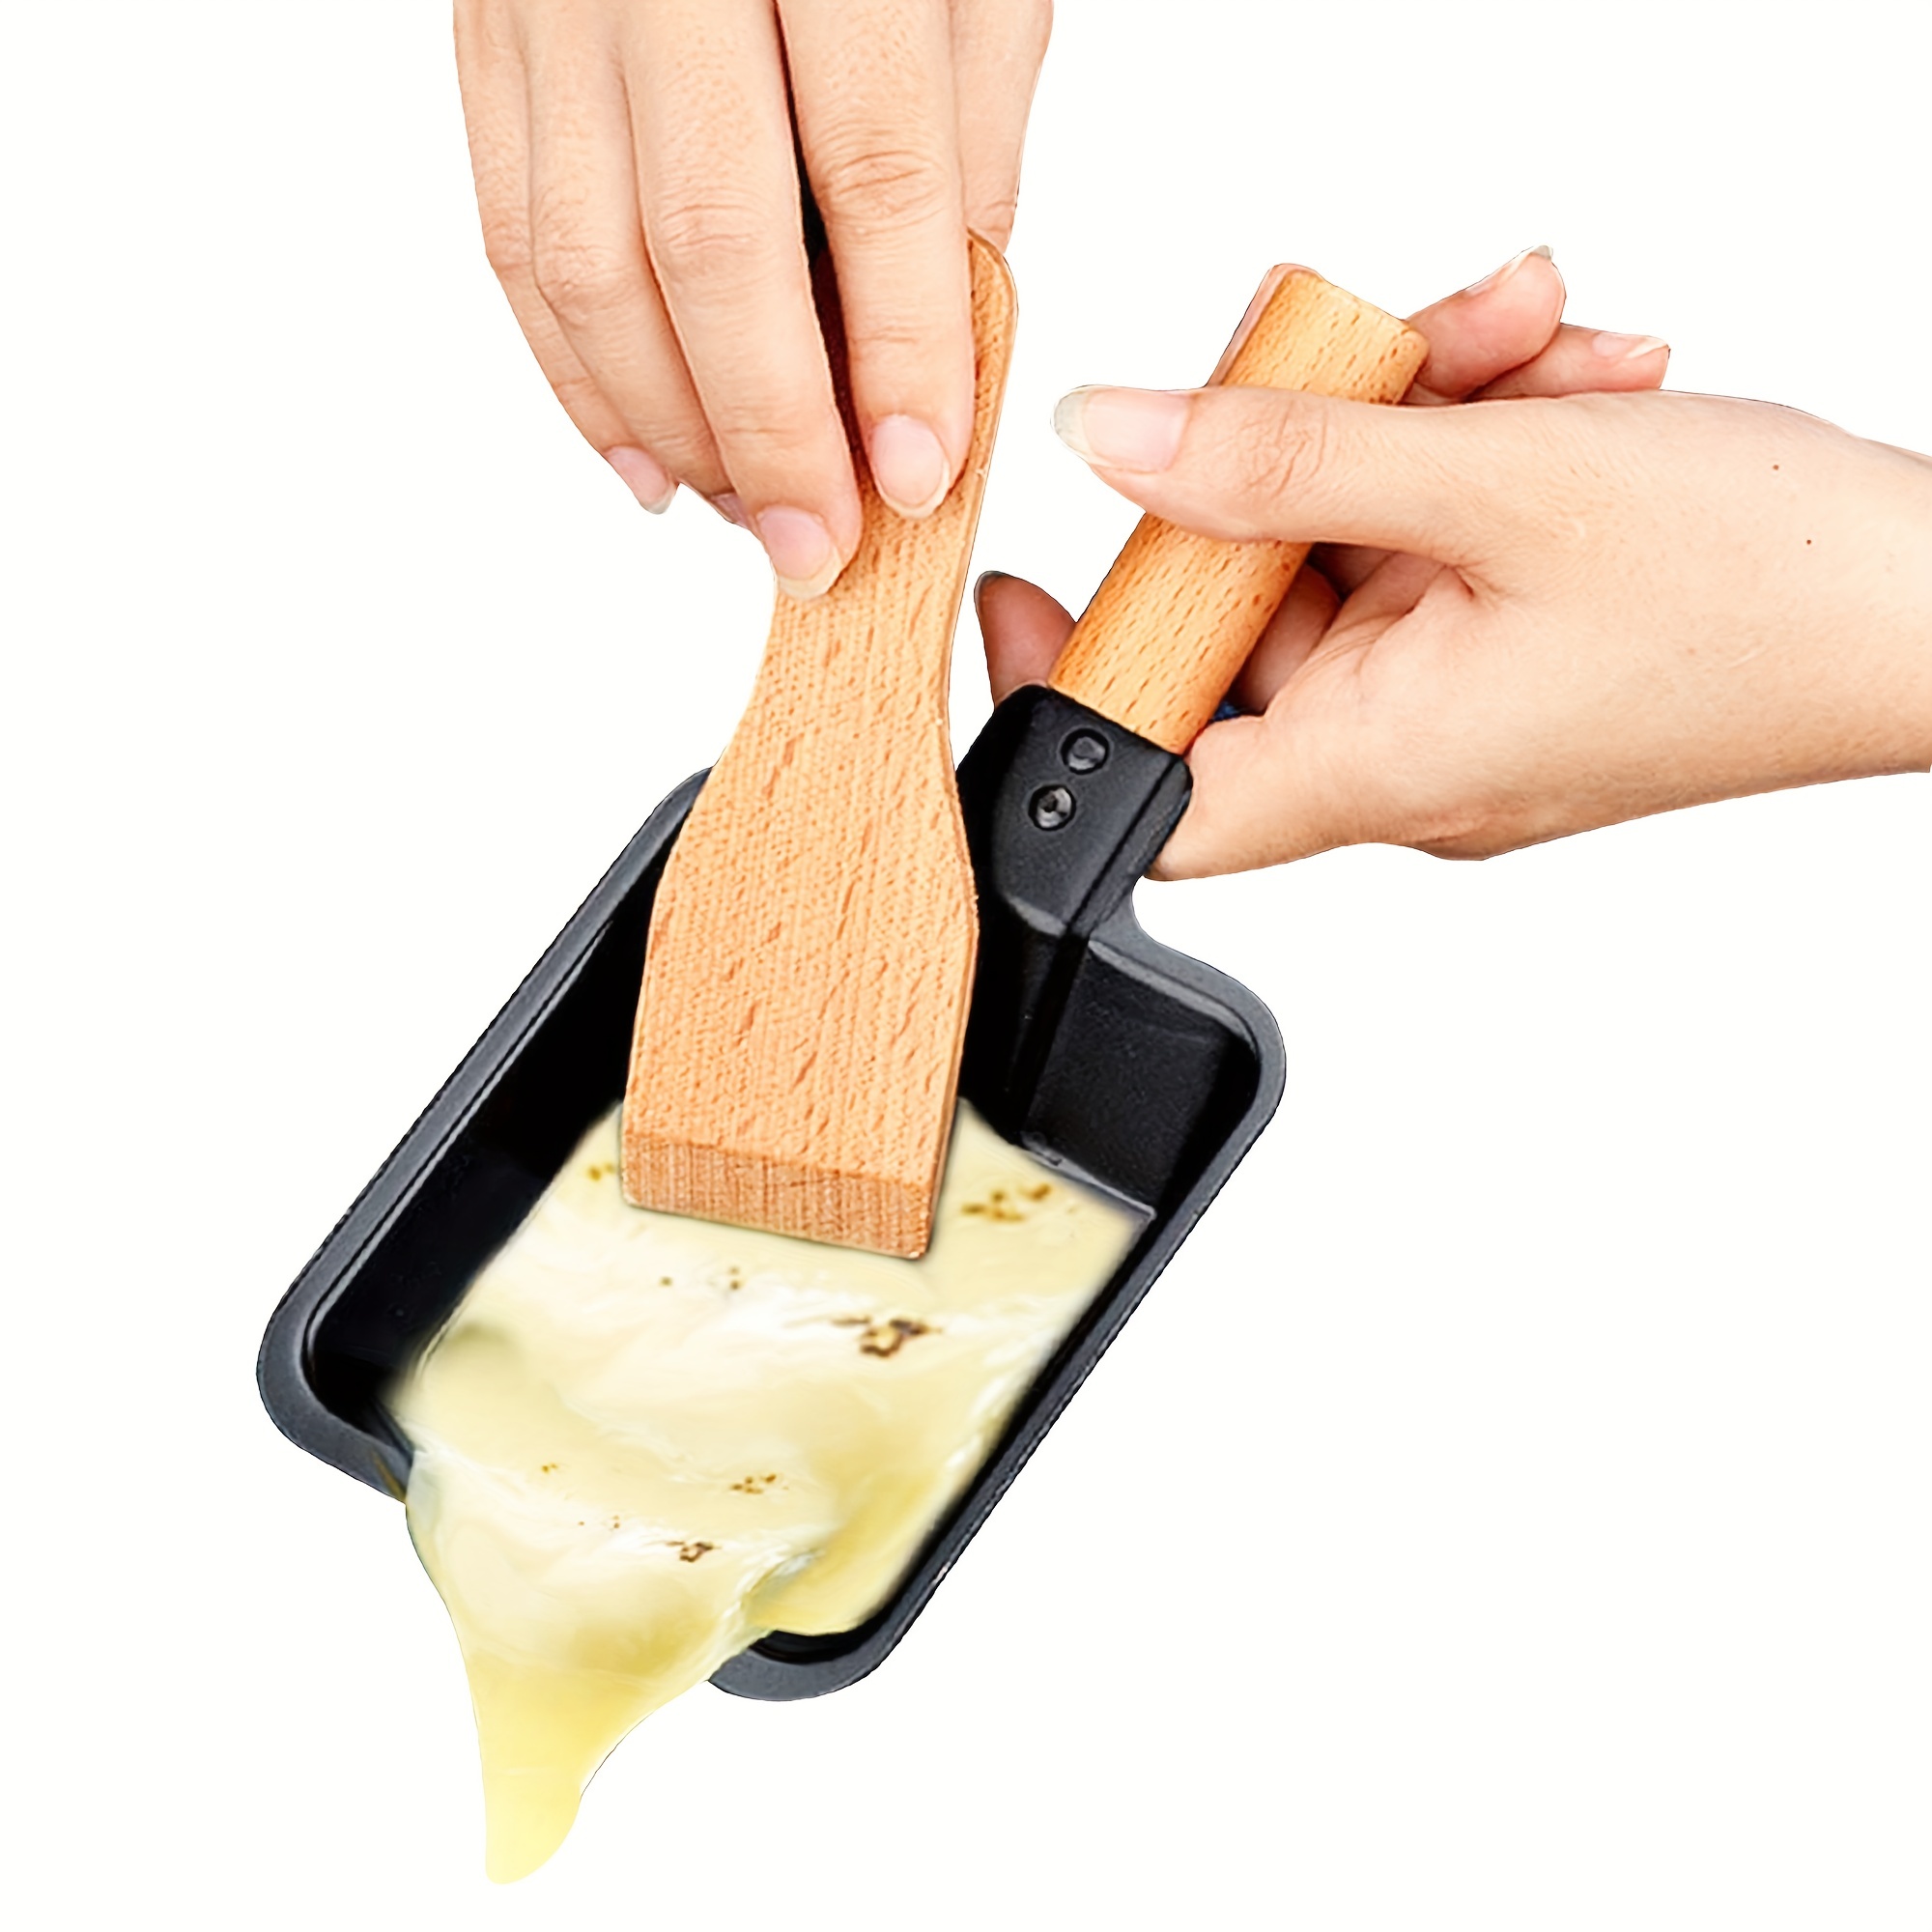 RSHJD Cheese Raclette Grill, Mini Raclette Set Portable Non-Stick Cheese  Raclette Pan Baking Tray Stove Set Home Kitchen Grilling Tool for Melting